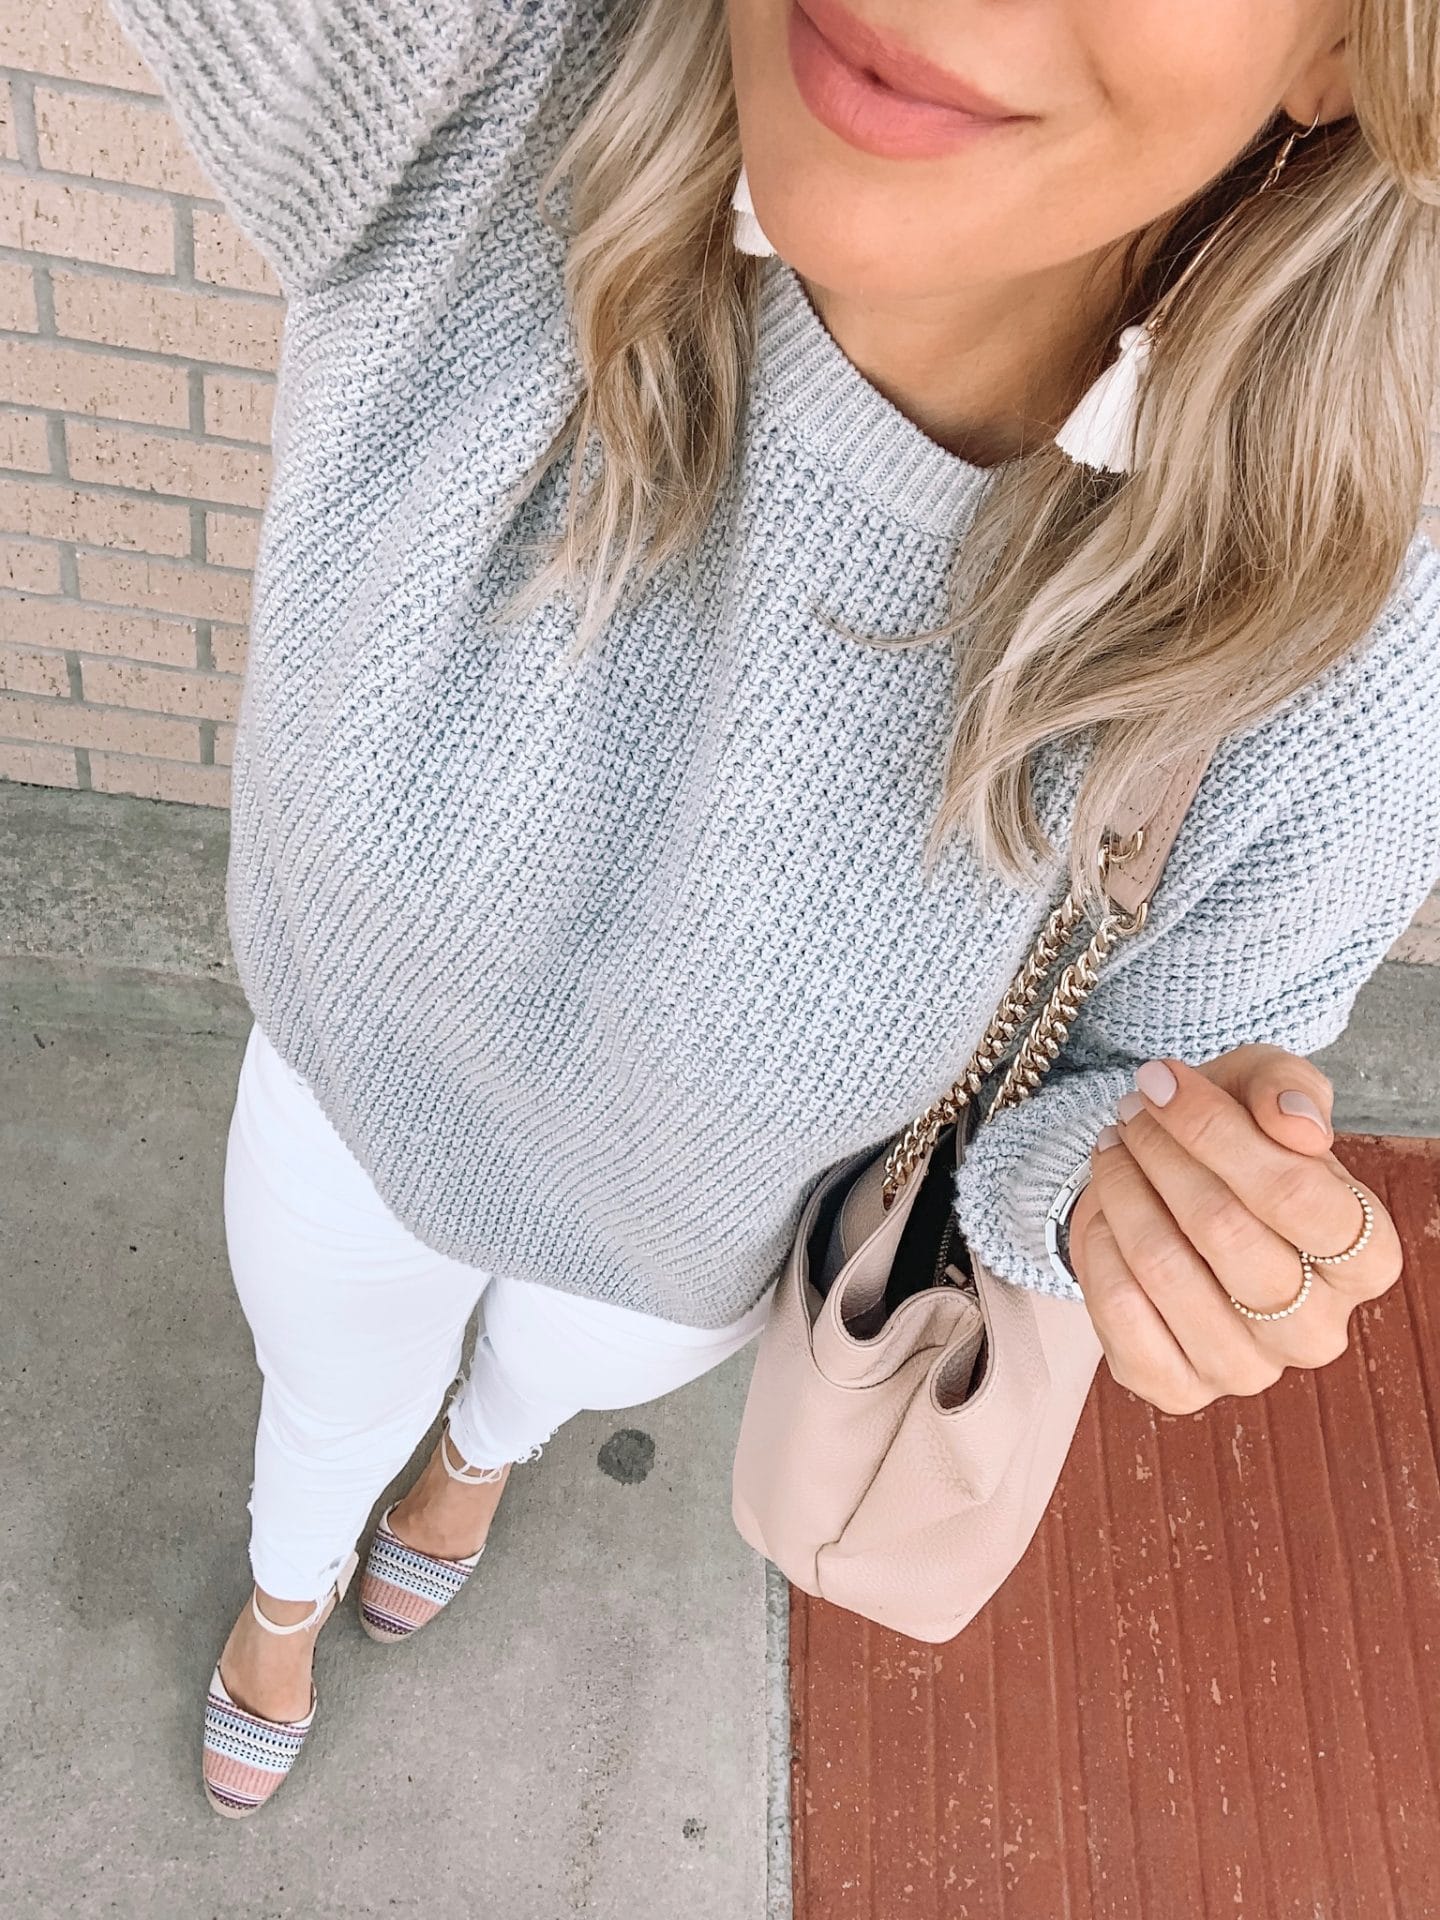 Grey sweater and white jeans